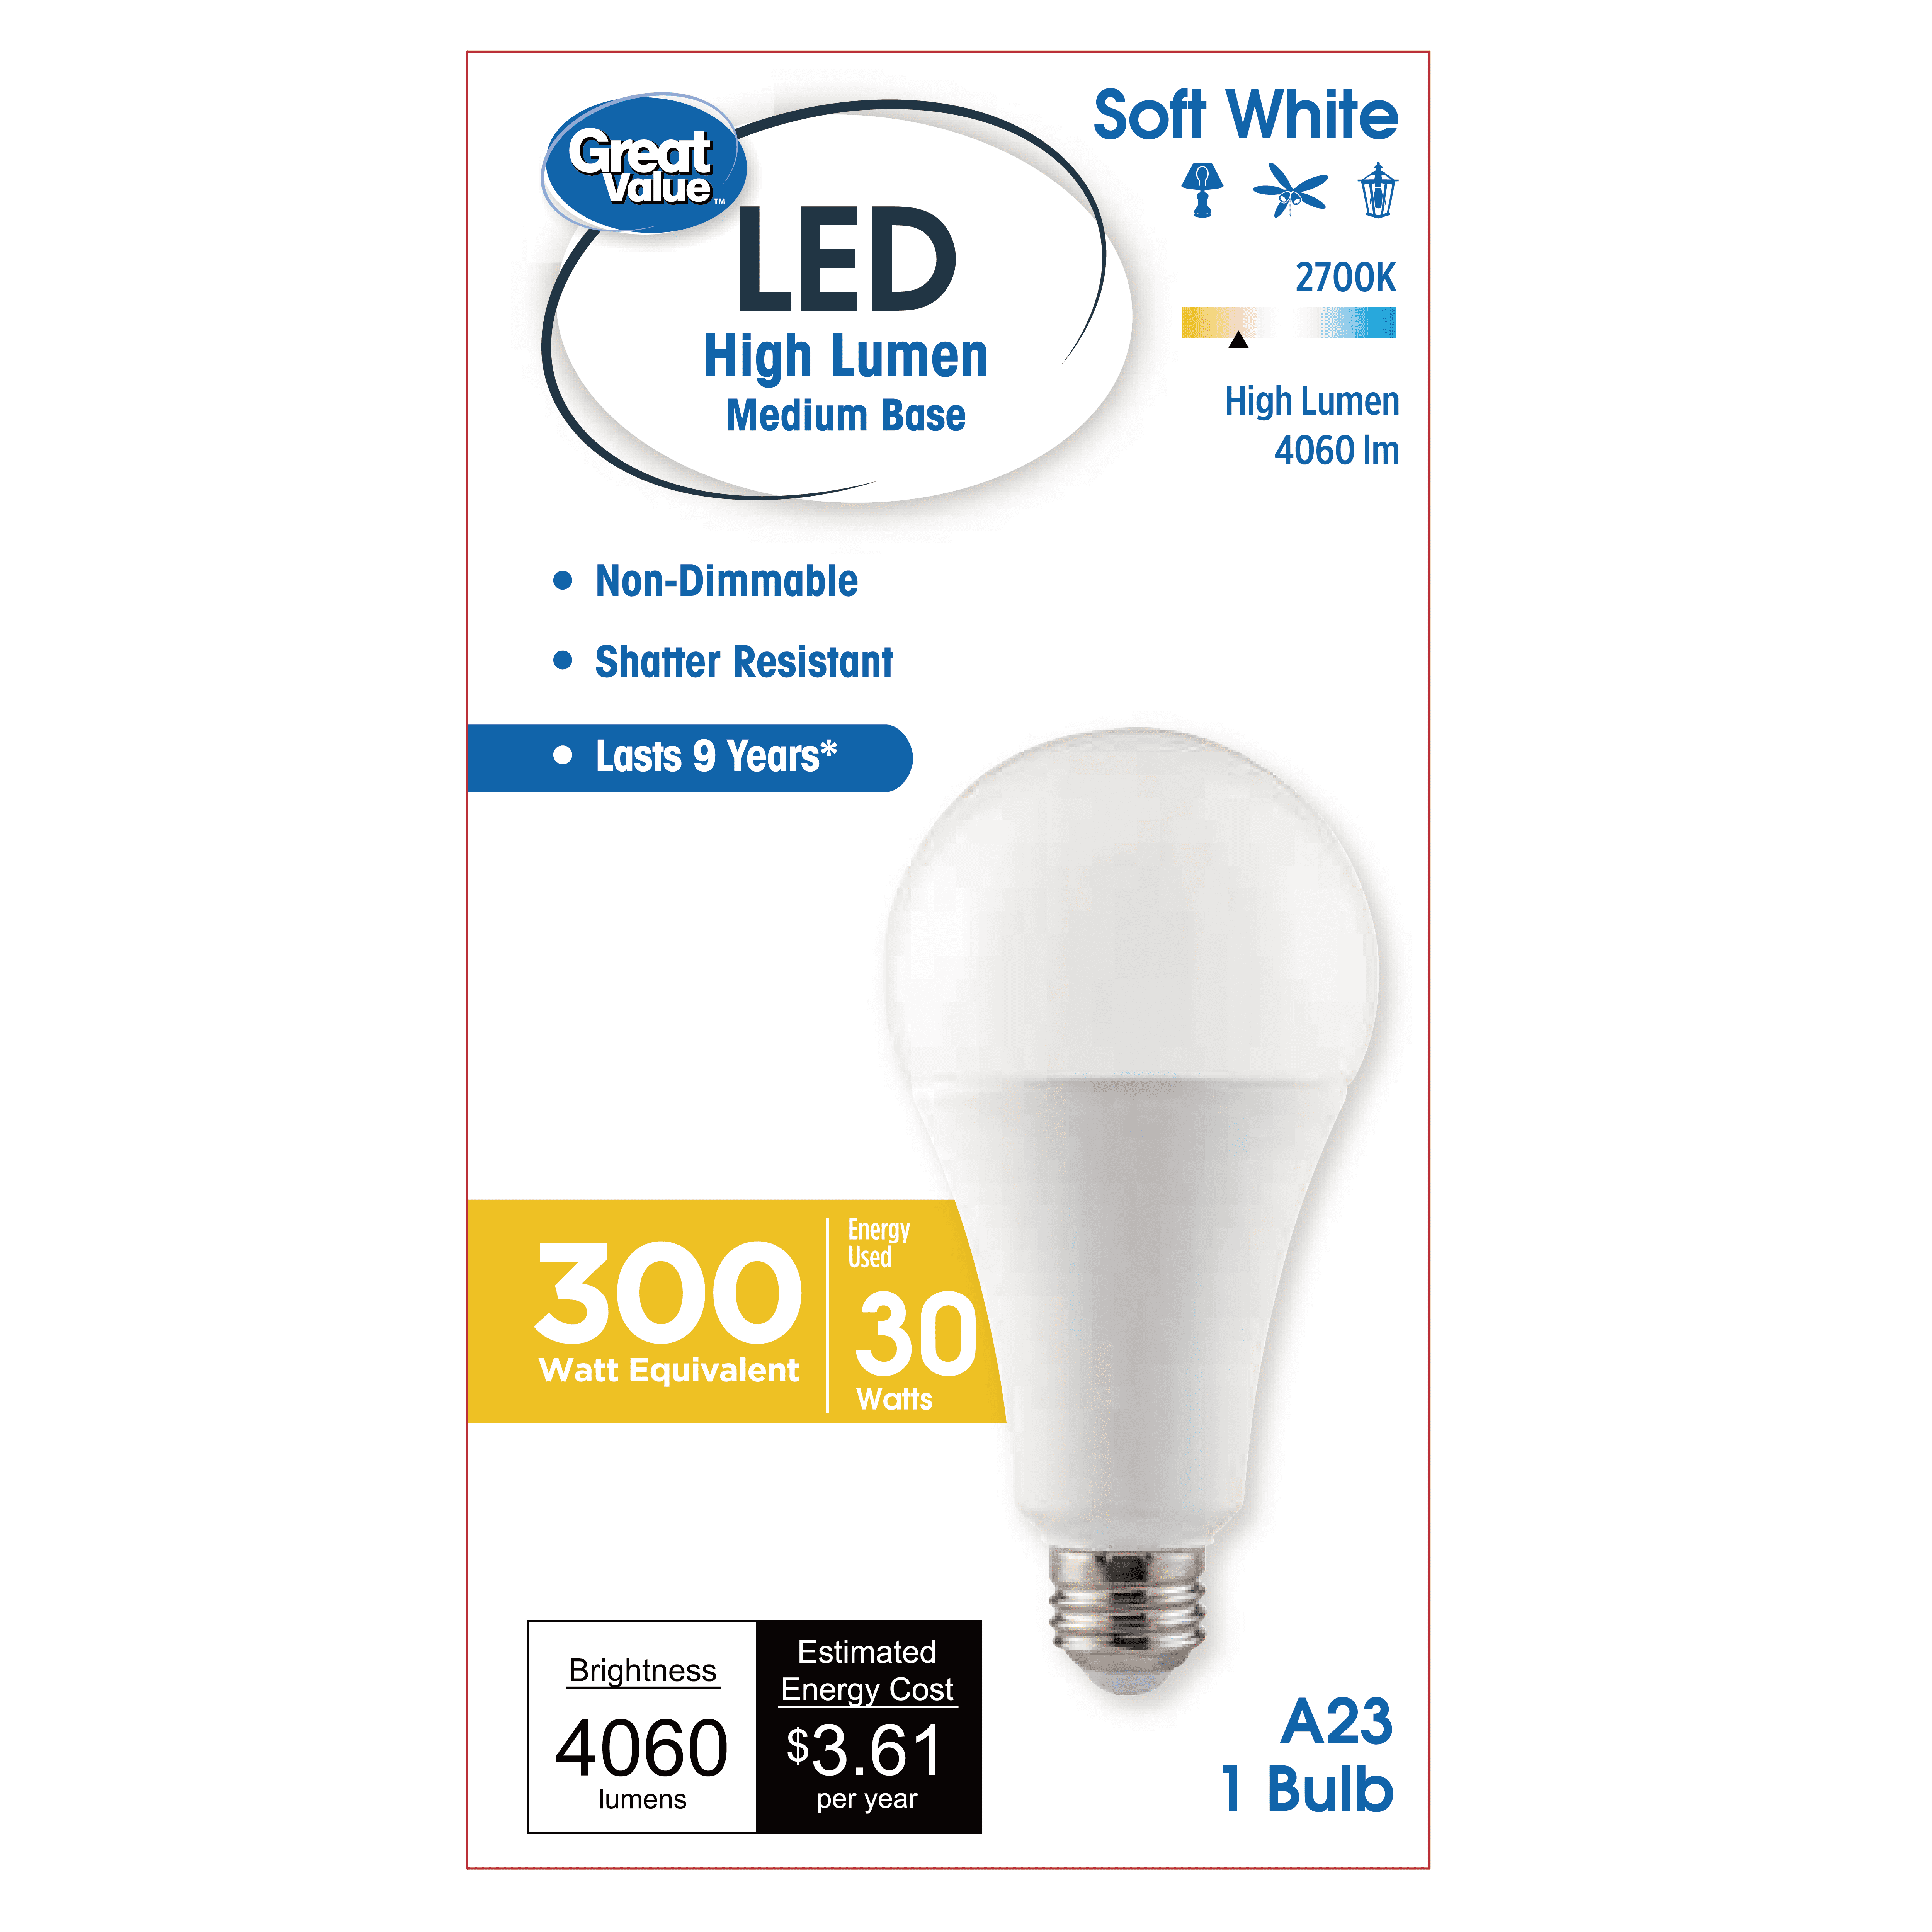 Great LED Frosted Light 200 Watts White High Lumens Bulb,Medium Base,Non Dimmable,1 - Walmart.com